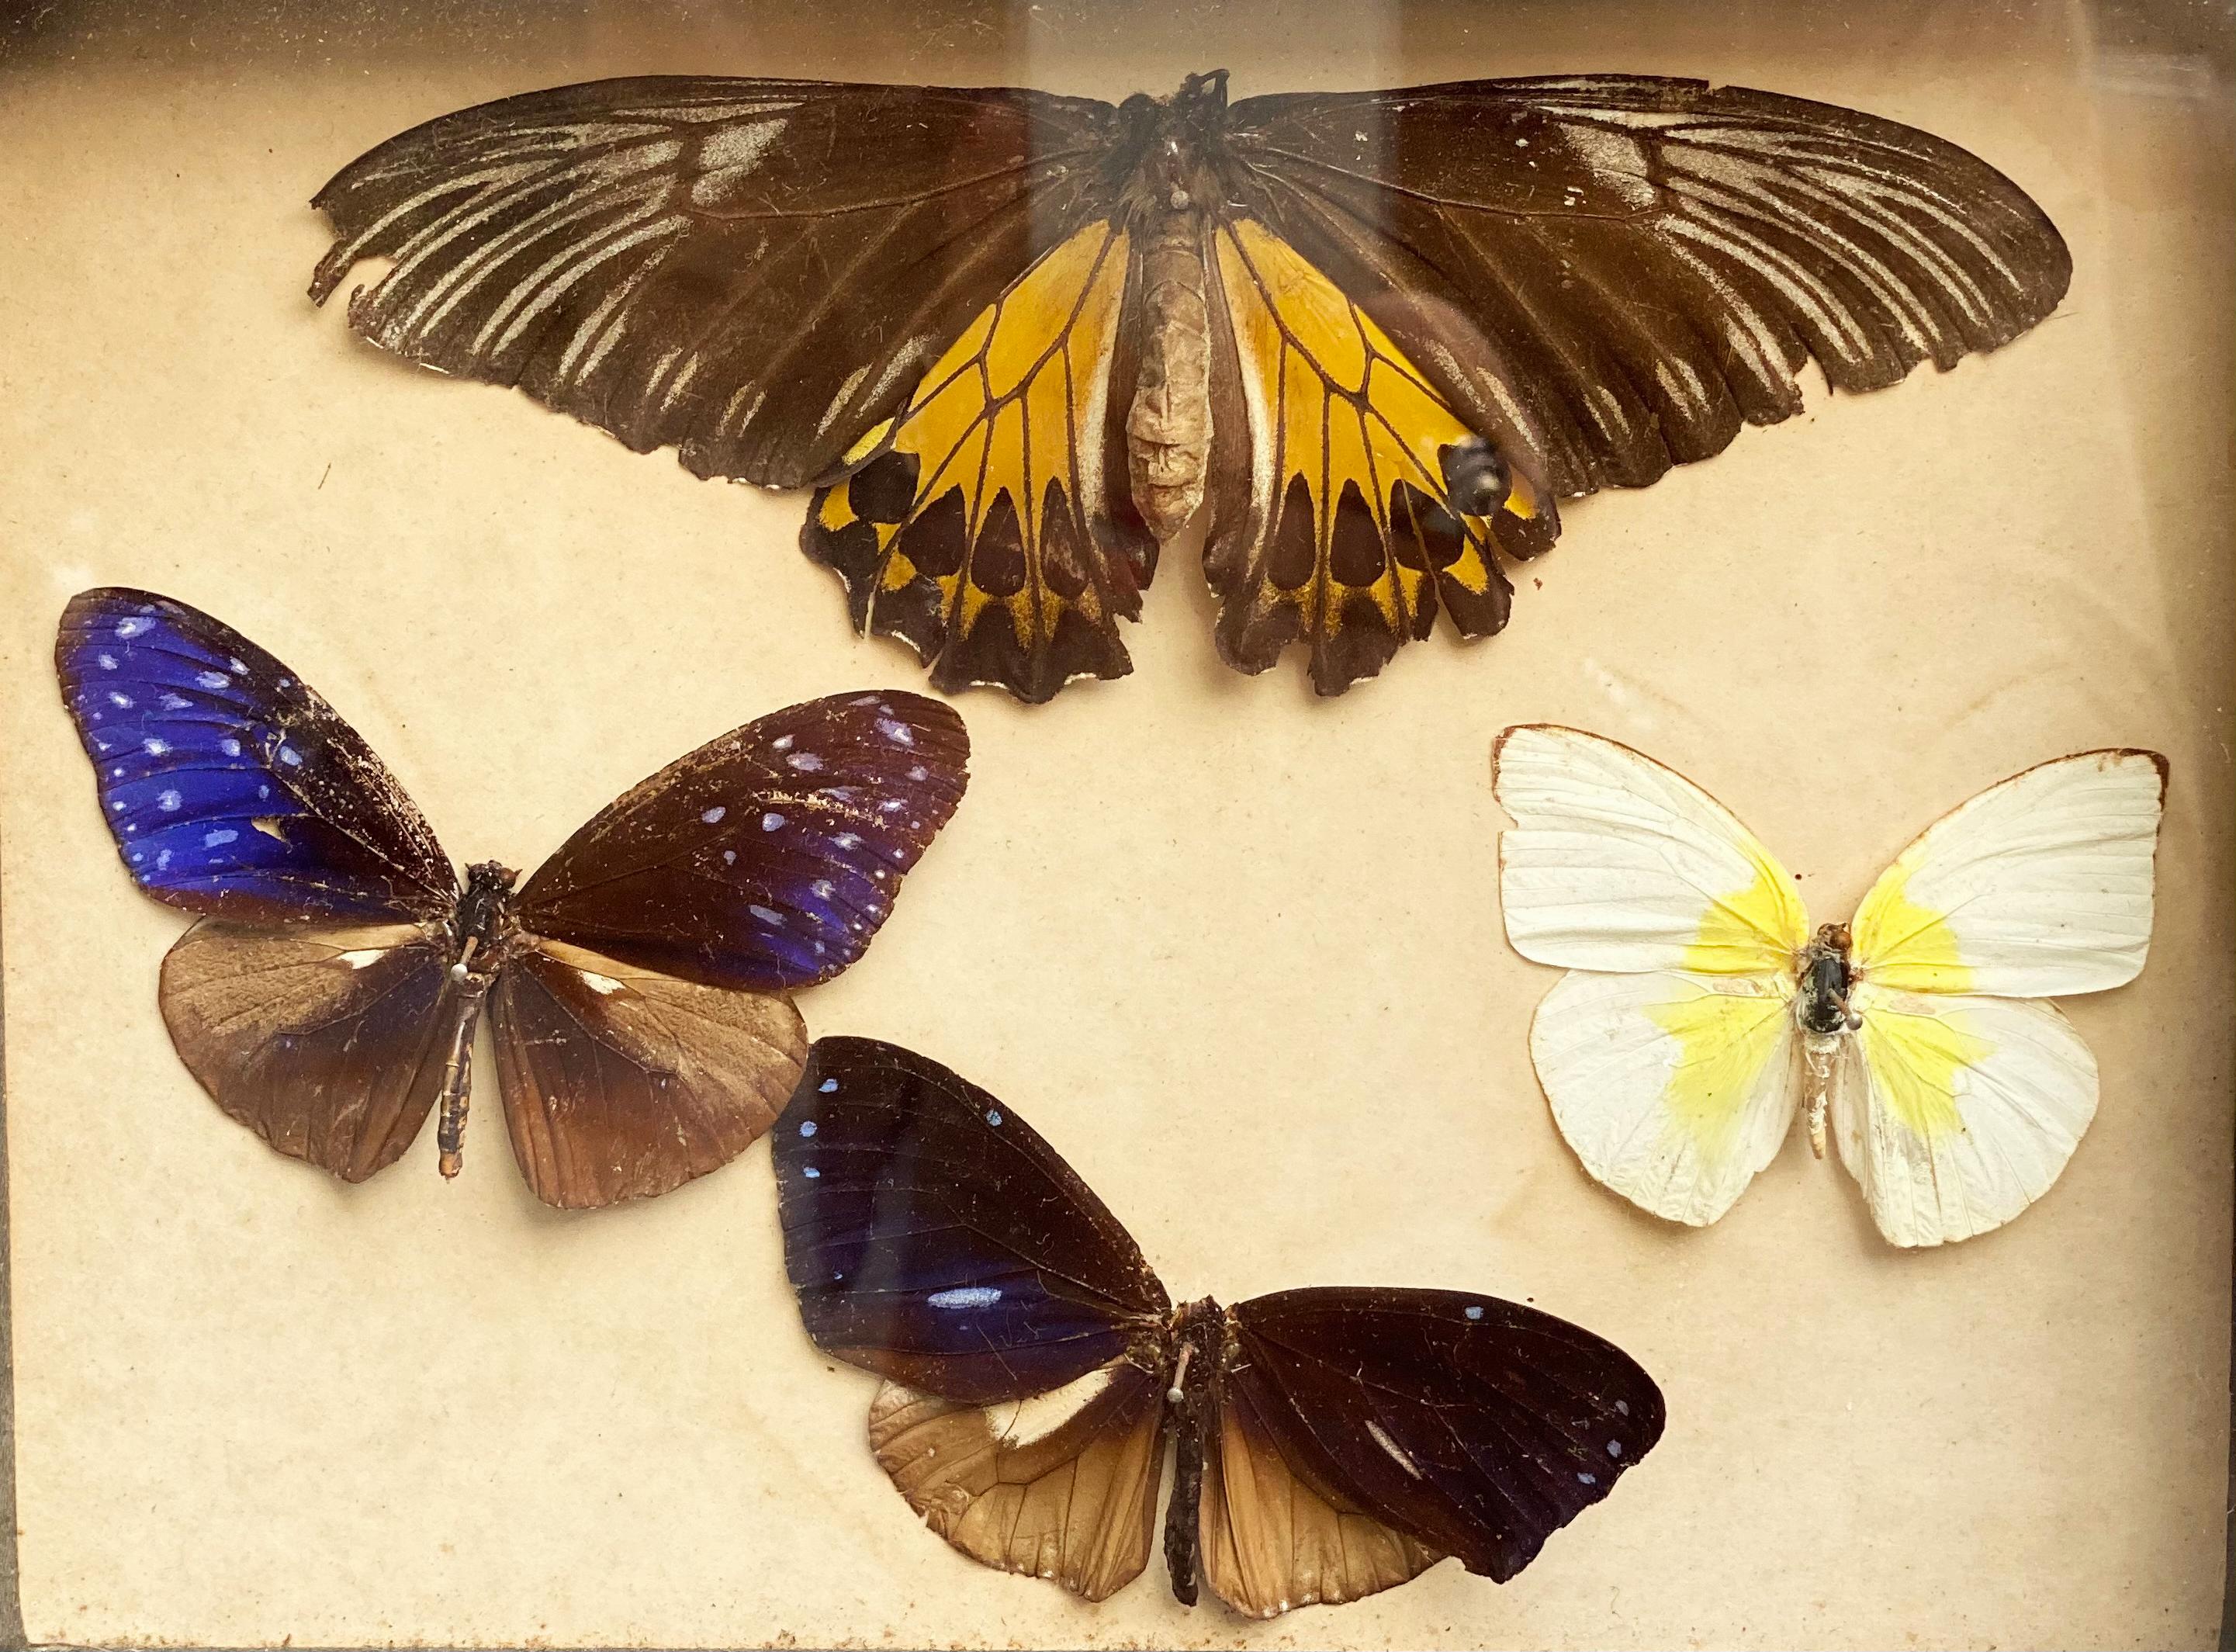 A group of real Brazilian butterflies presented in a beautiful antique wooden box from 1960. These specimens are extremely rare and have been selected from a vintage collection.